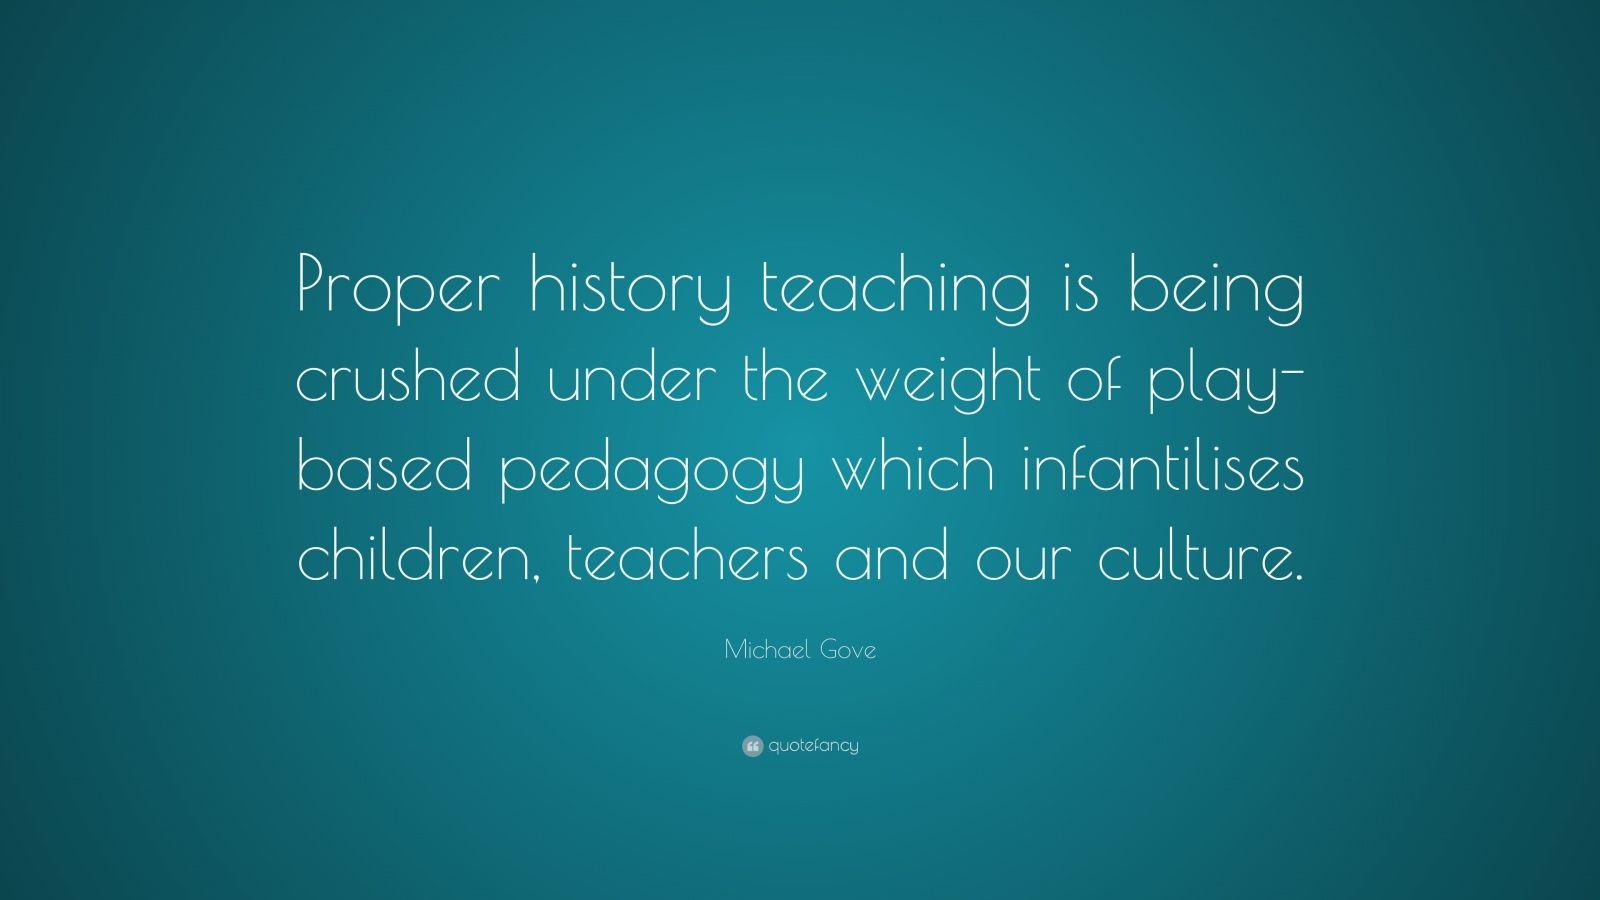 Michael Gove Quote: “Proper history teaching is being crushed